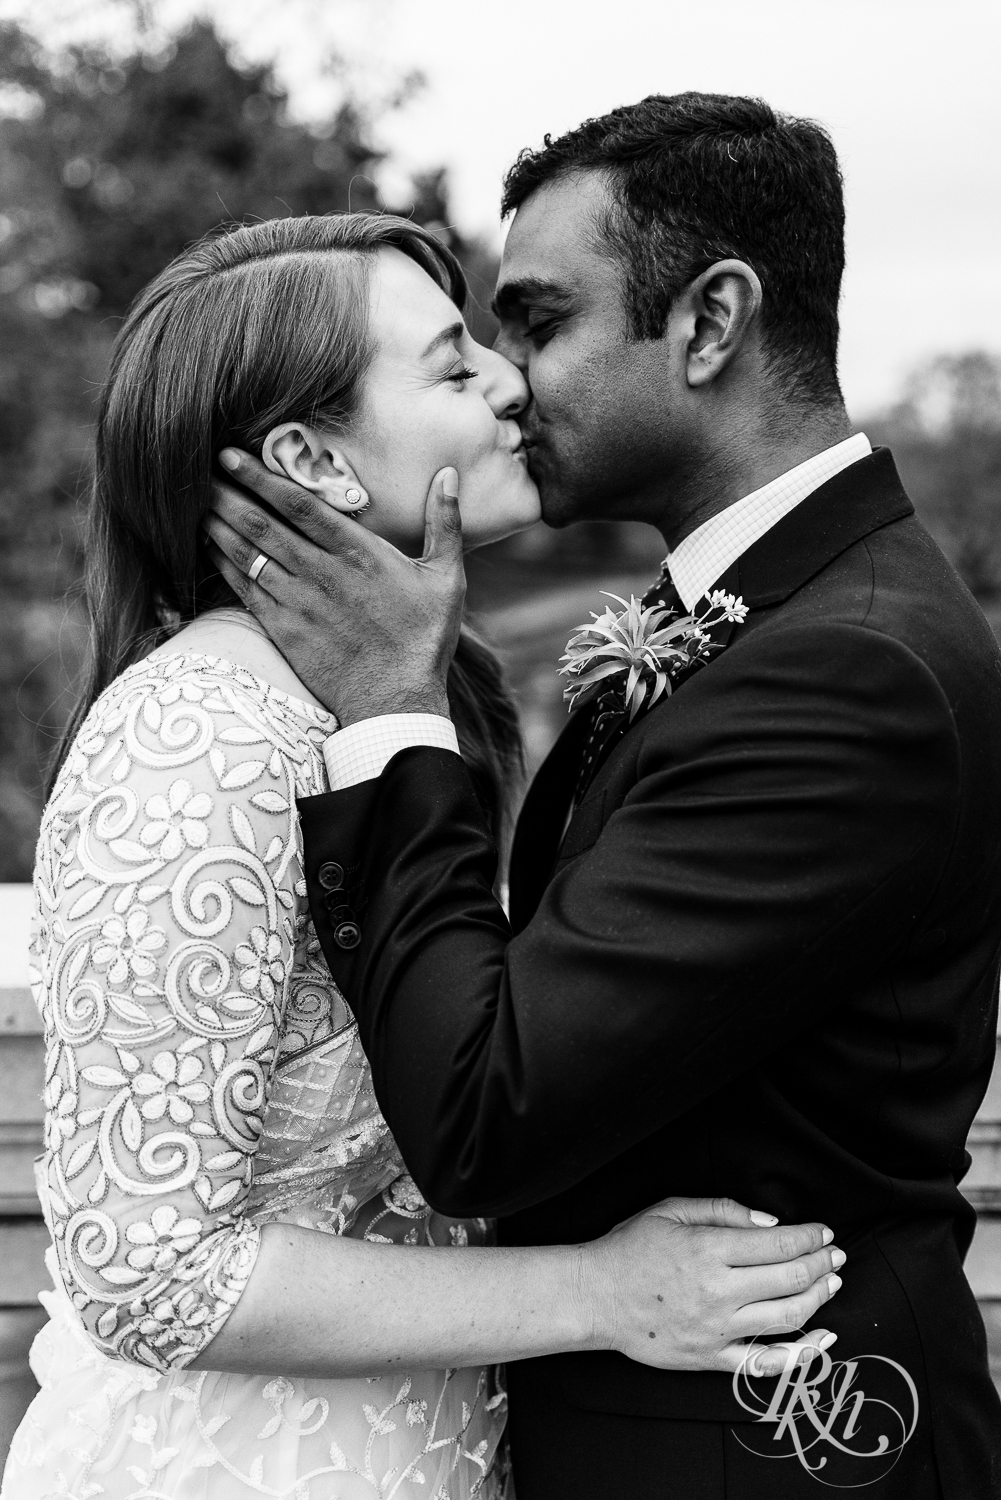 Bride and groom kiss outside at Indian wedding at Como Zoo Conservatory in Saint Paul, Minnesota.